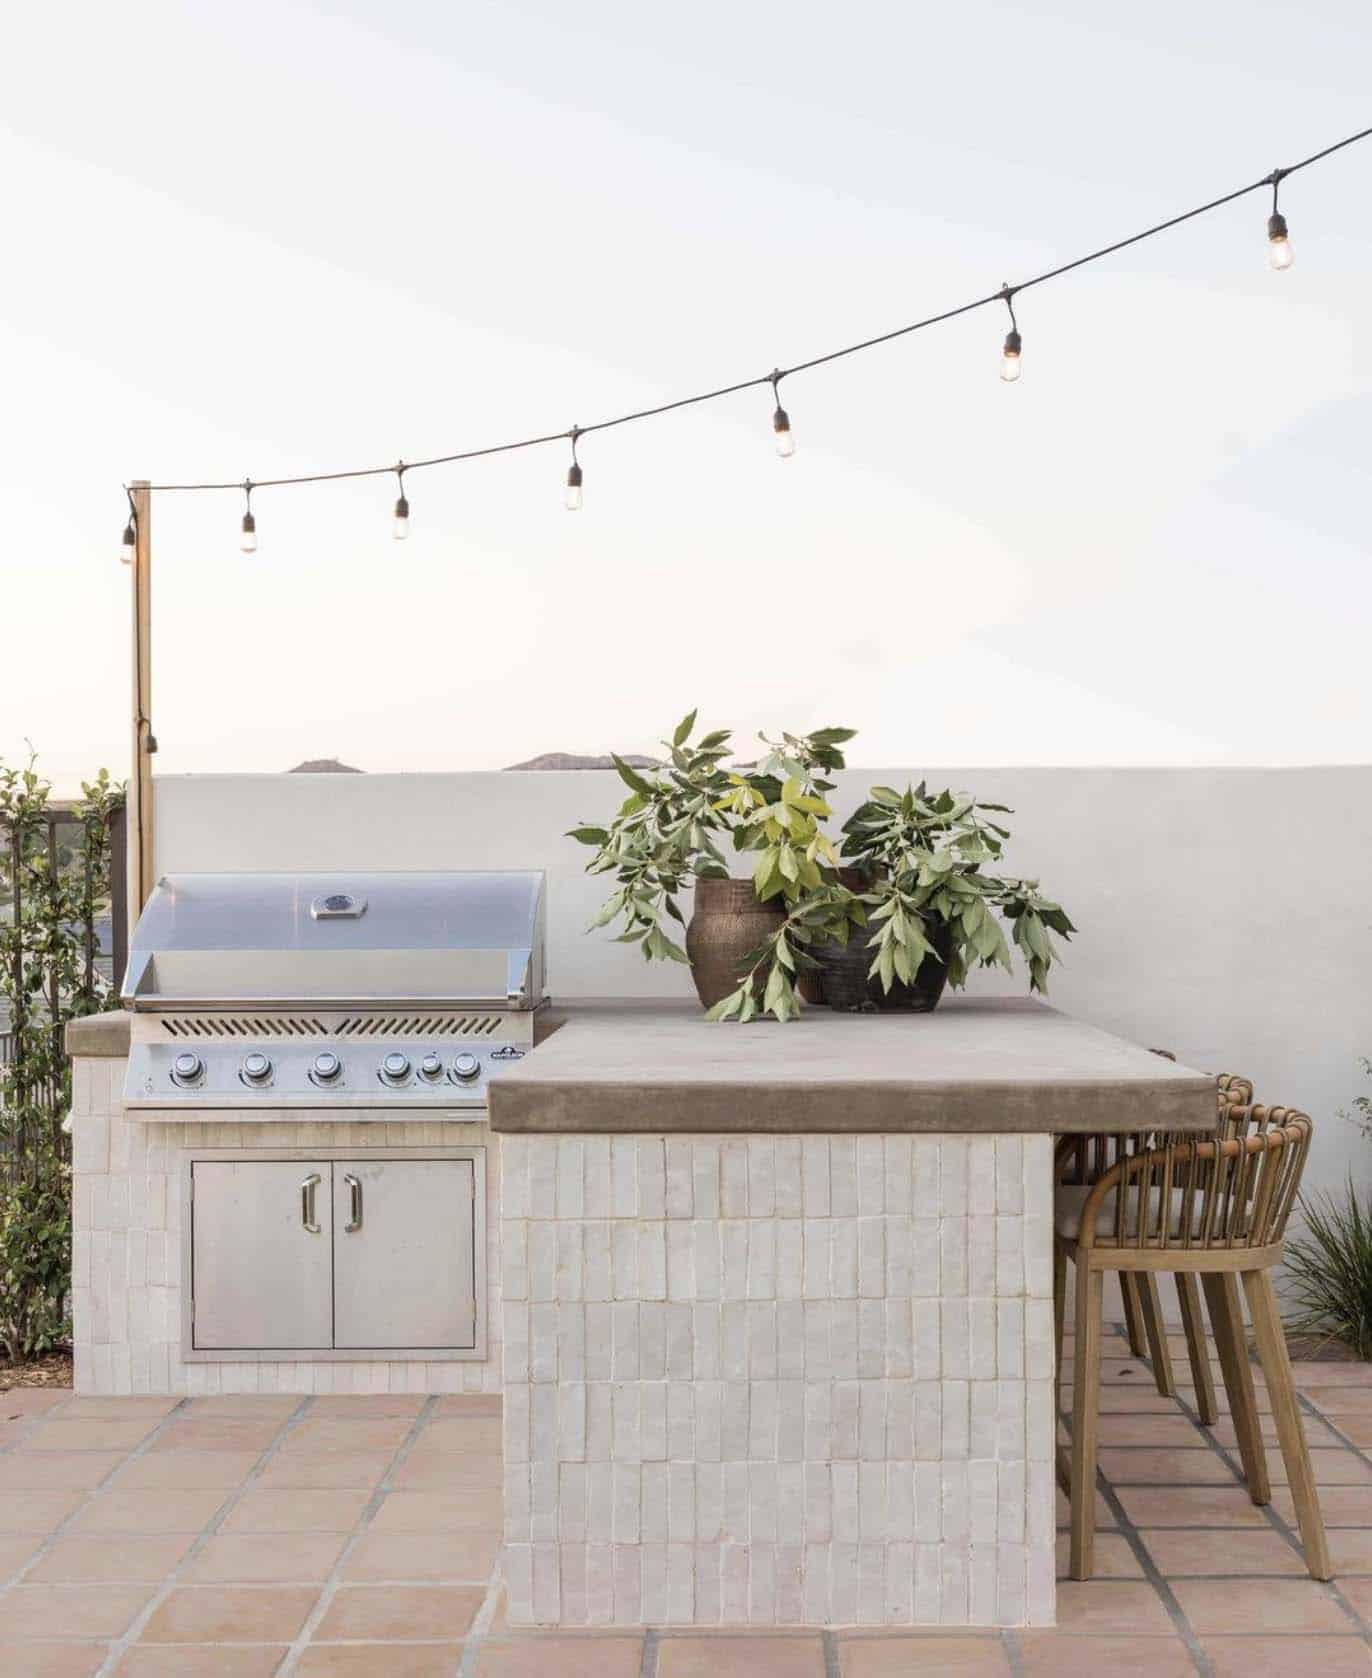 beach style patio with a bbq and bar top with counter stools and overhead string lights